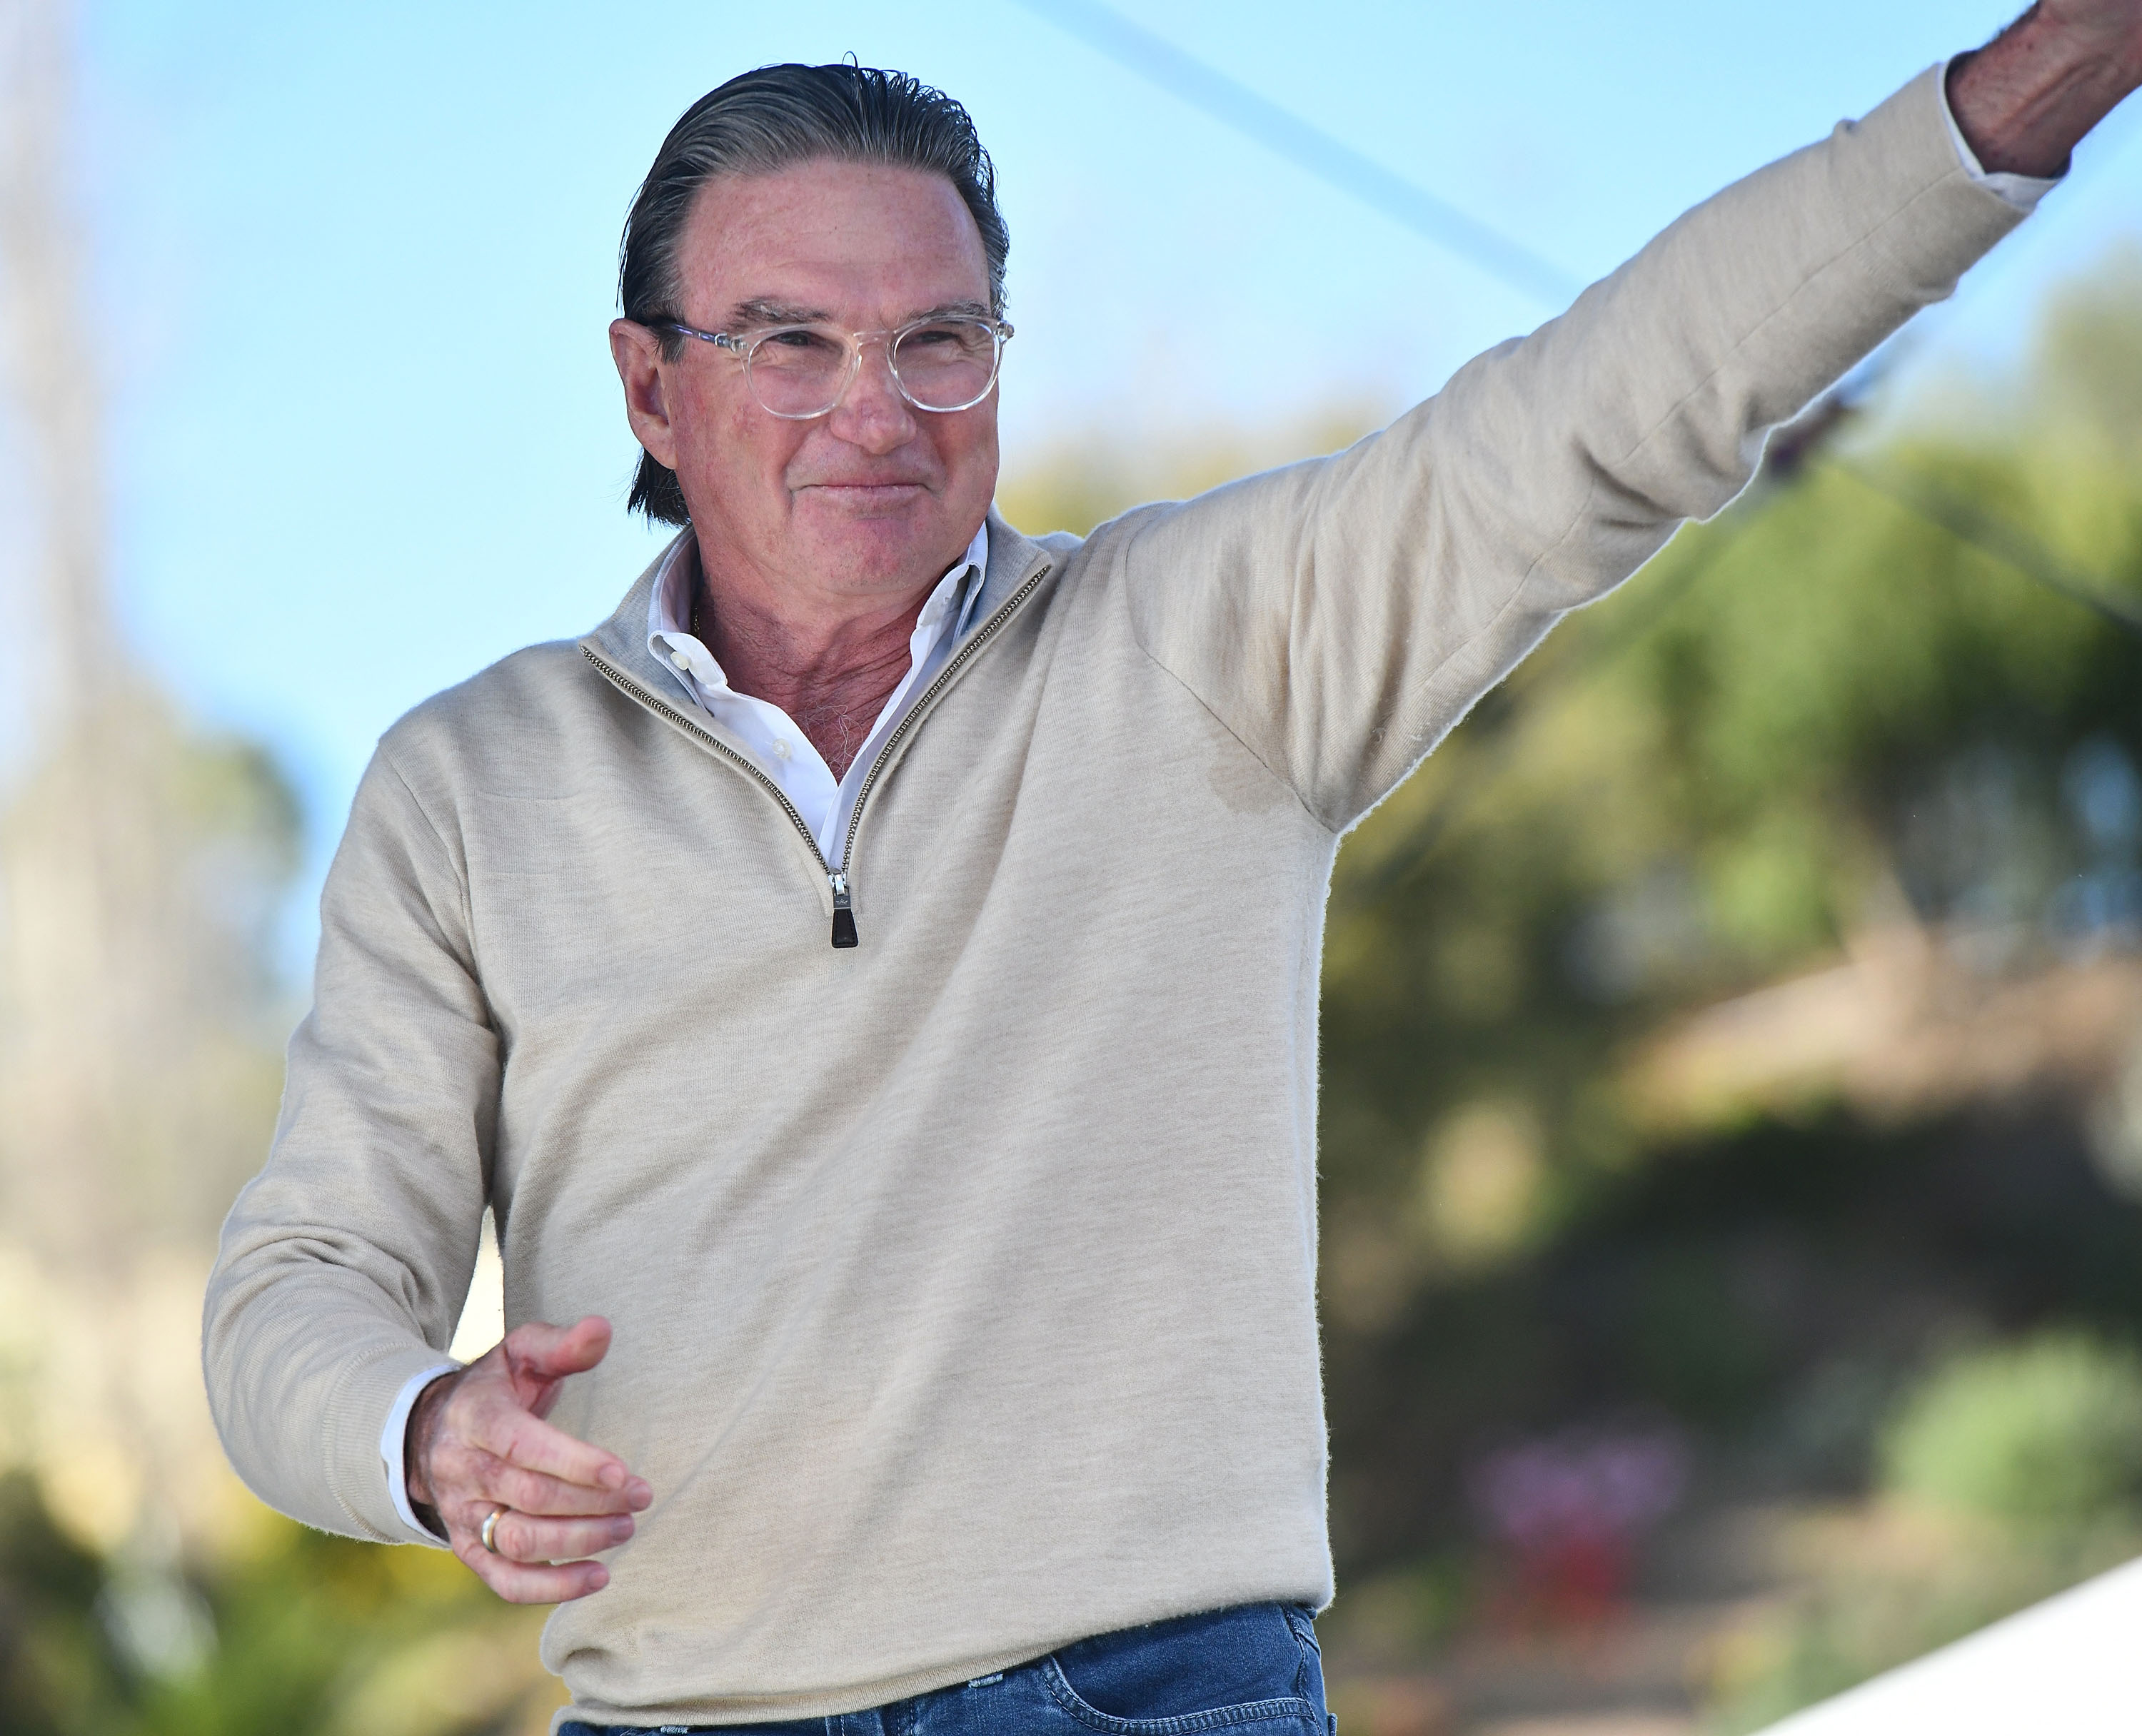 Where Is Tennis Legend Jimmy Connors Now and What's His Net Worth?